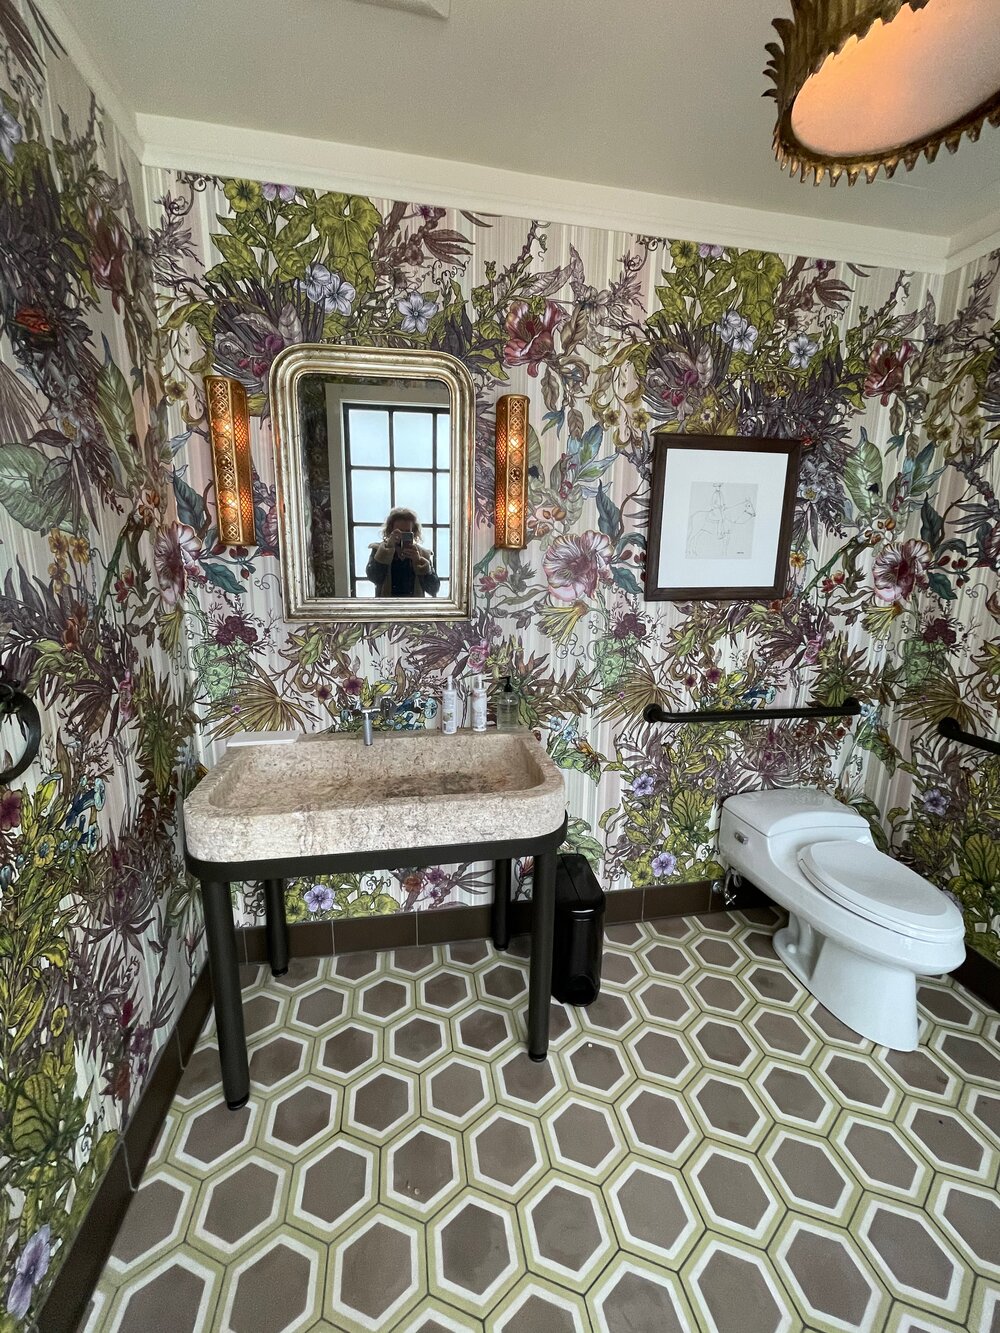 Obsessed with this garden bathroom